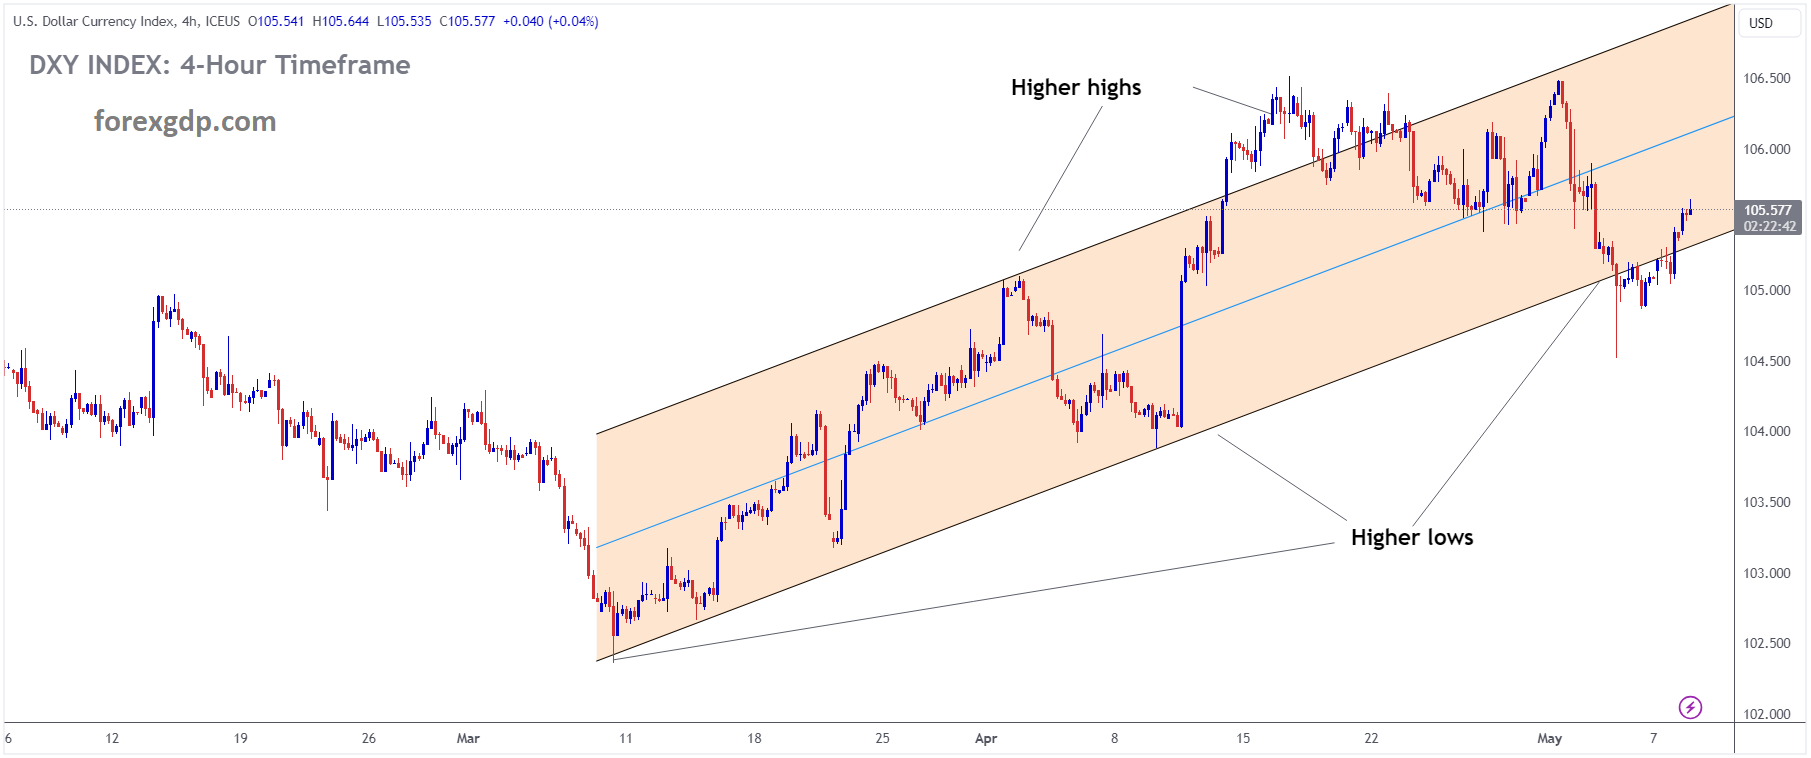 USD INDEX is moving in an Ascending channel and the market has rebounded from the higher low area of the channel